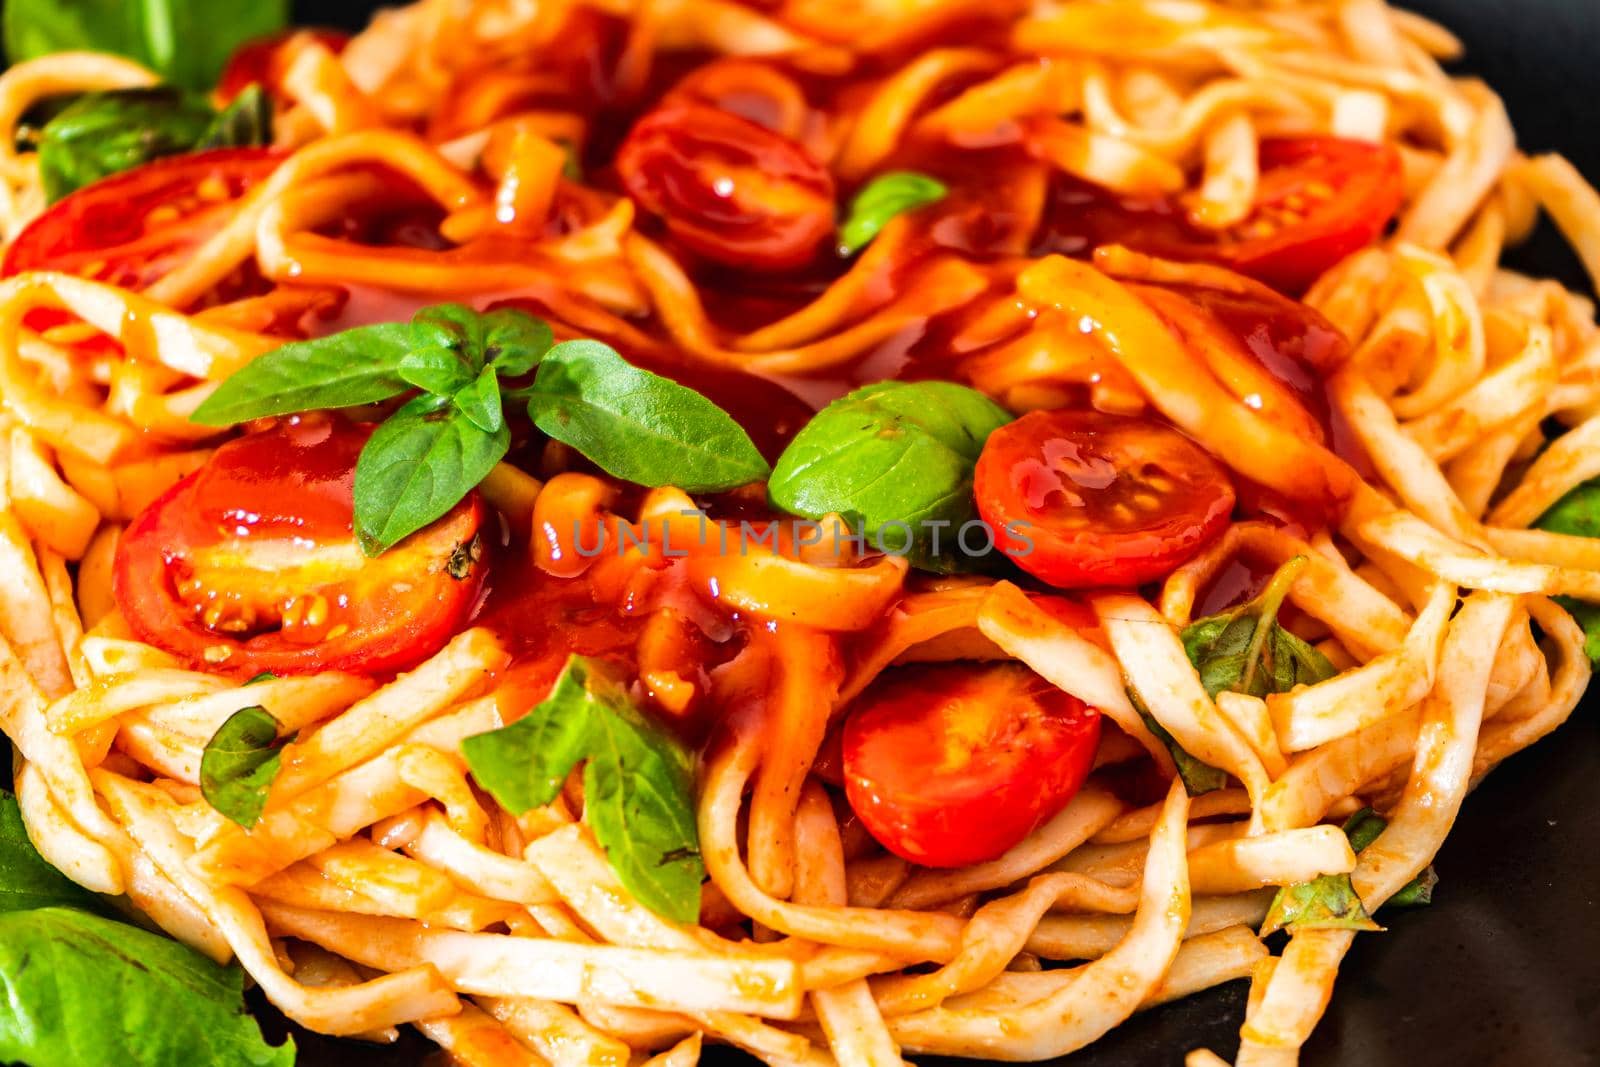 Spaghetti pasta with an exquisite homemade tomato sauce with homemade basil leaves served on a black plate on a rustic table. Close up. High view.